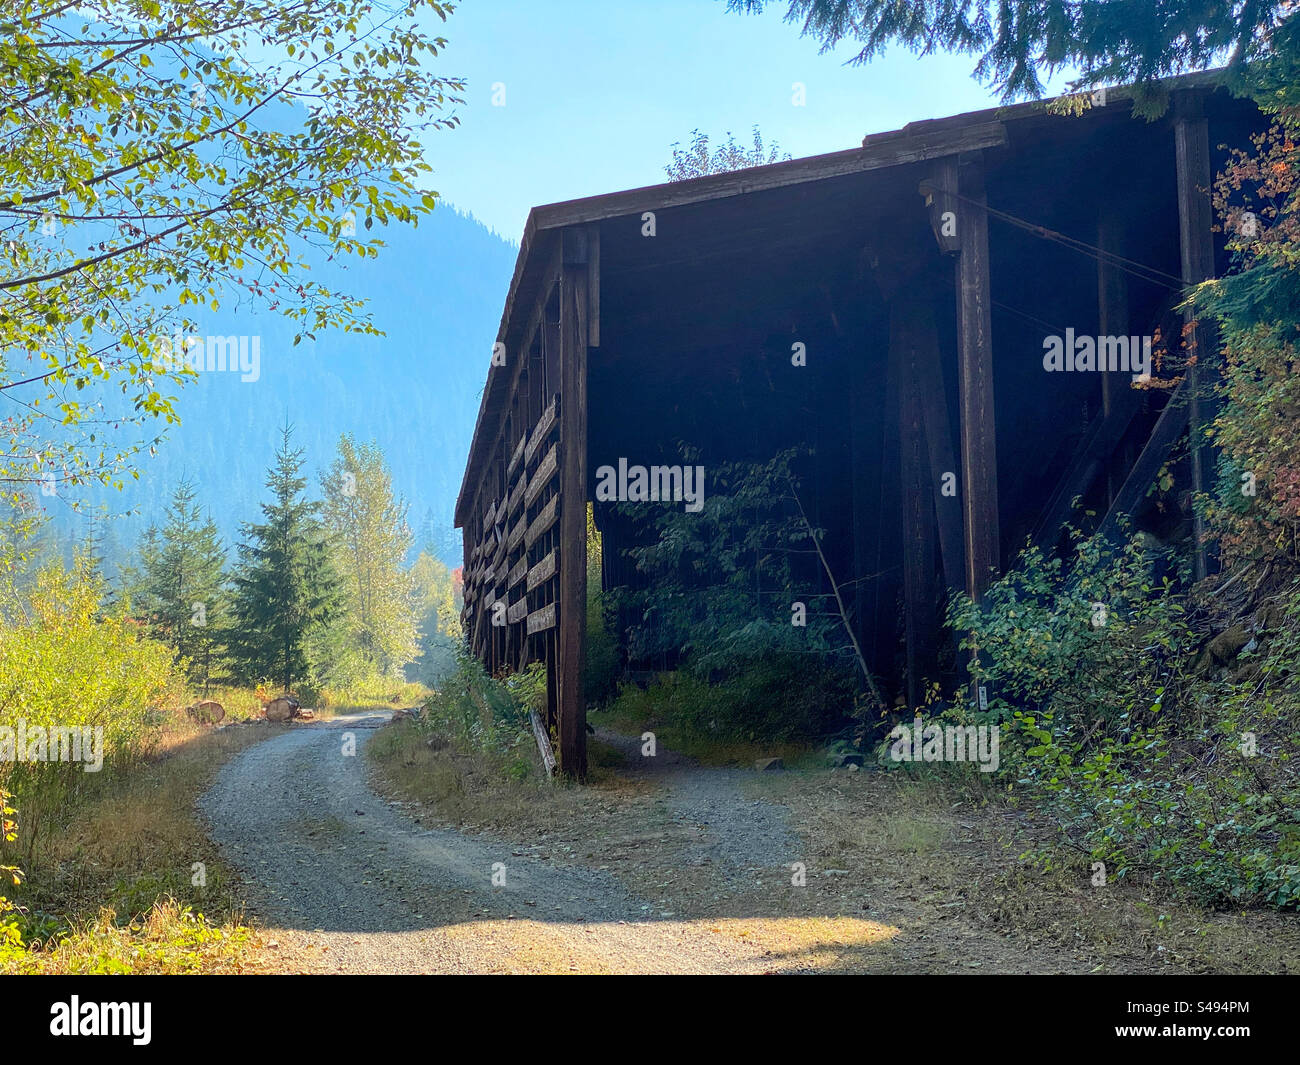 Avalanche shelter along a converted bike trail in the foothills of the Cascade mountains in Washington state Stock Photo